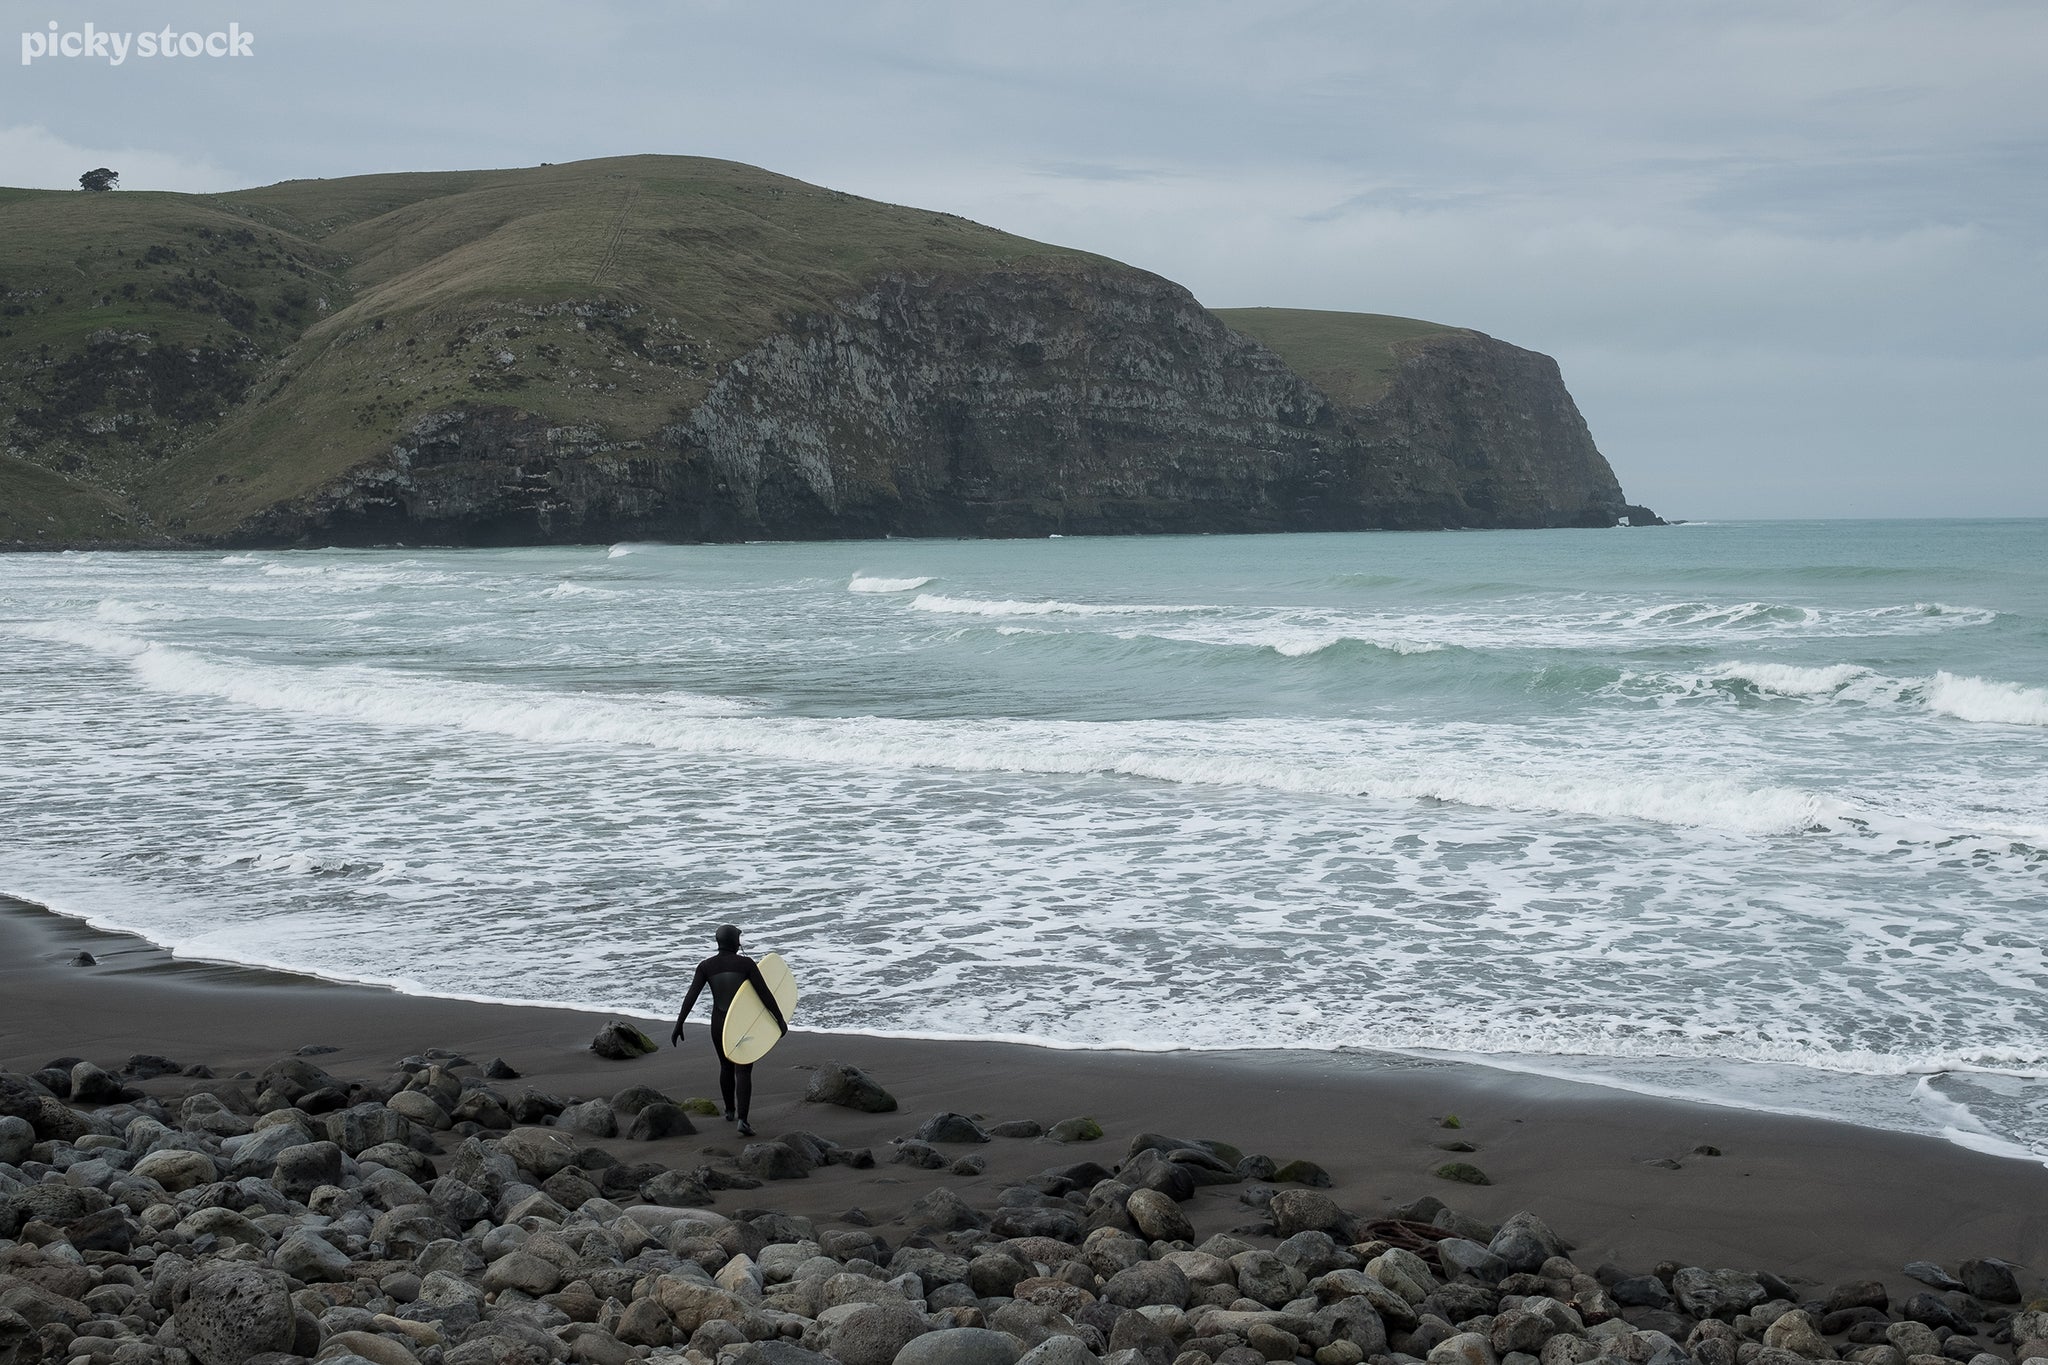 Landscape of a rocky beach and green hillside, a surfer in a black wetsuit and white surfboard looks out towards the water as waves push towards the shore, white crests breaking on contact with one another.